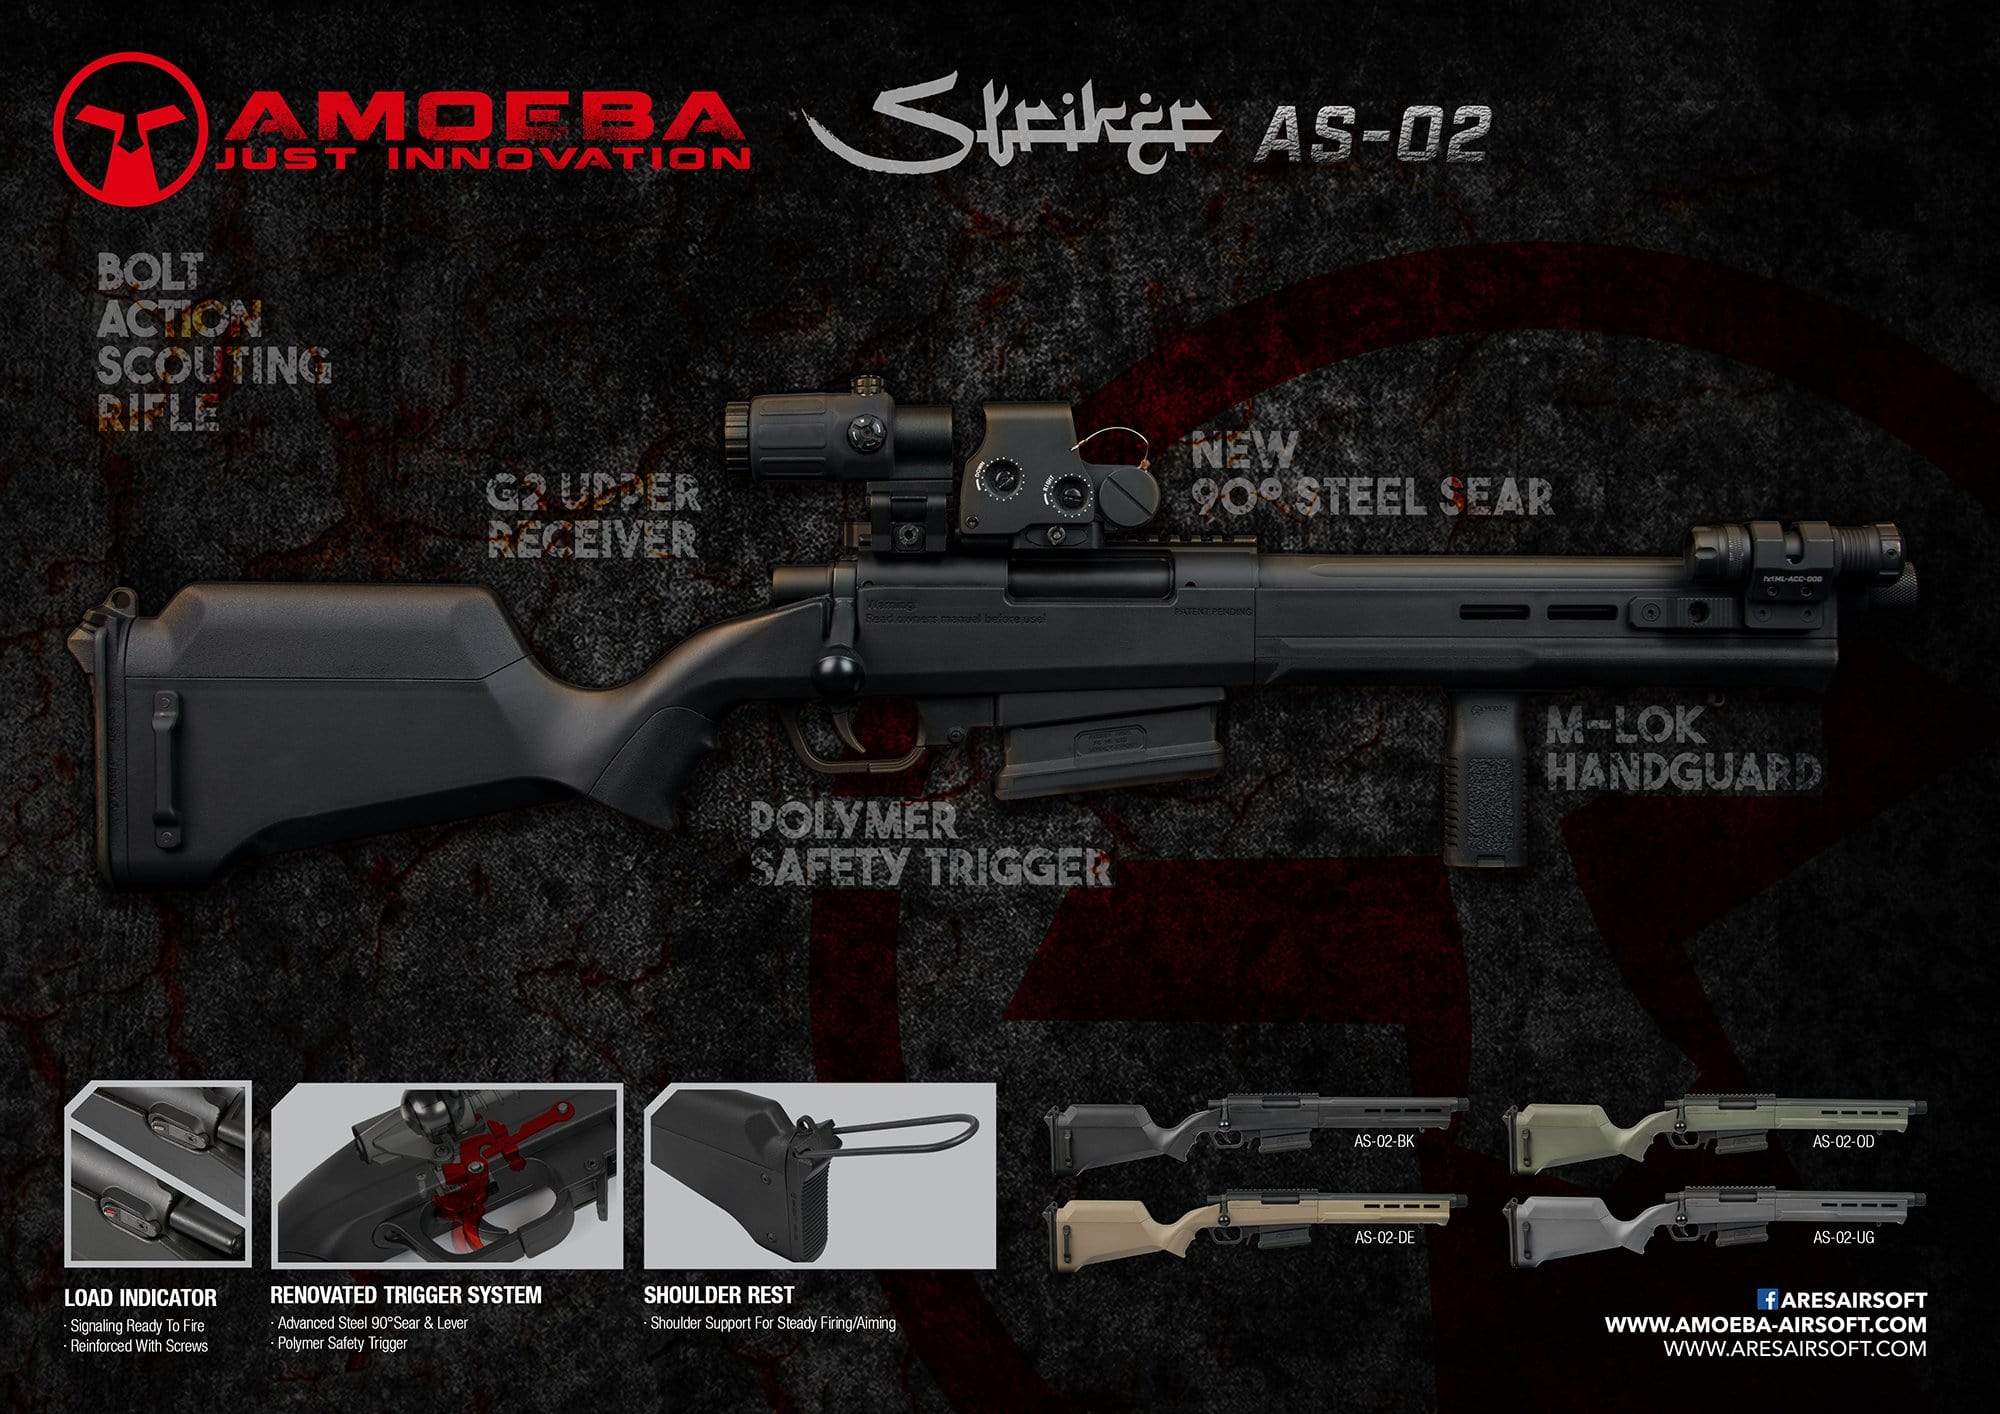 AMOEBA "Striker" S2 Sniper Rifle - Black - Eminent Paintball And Airsoft